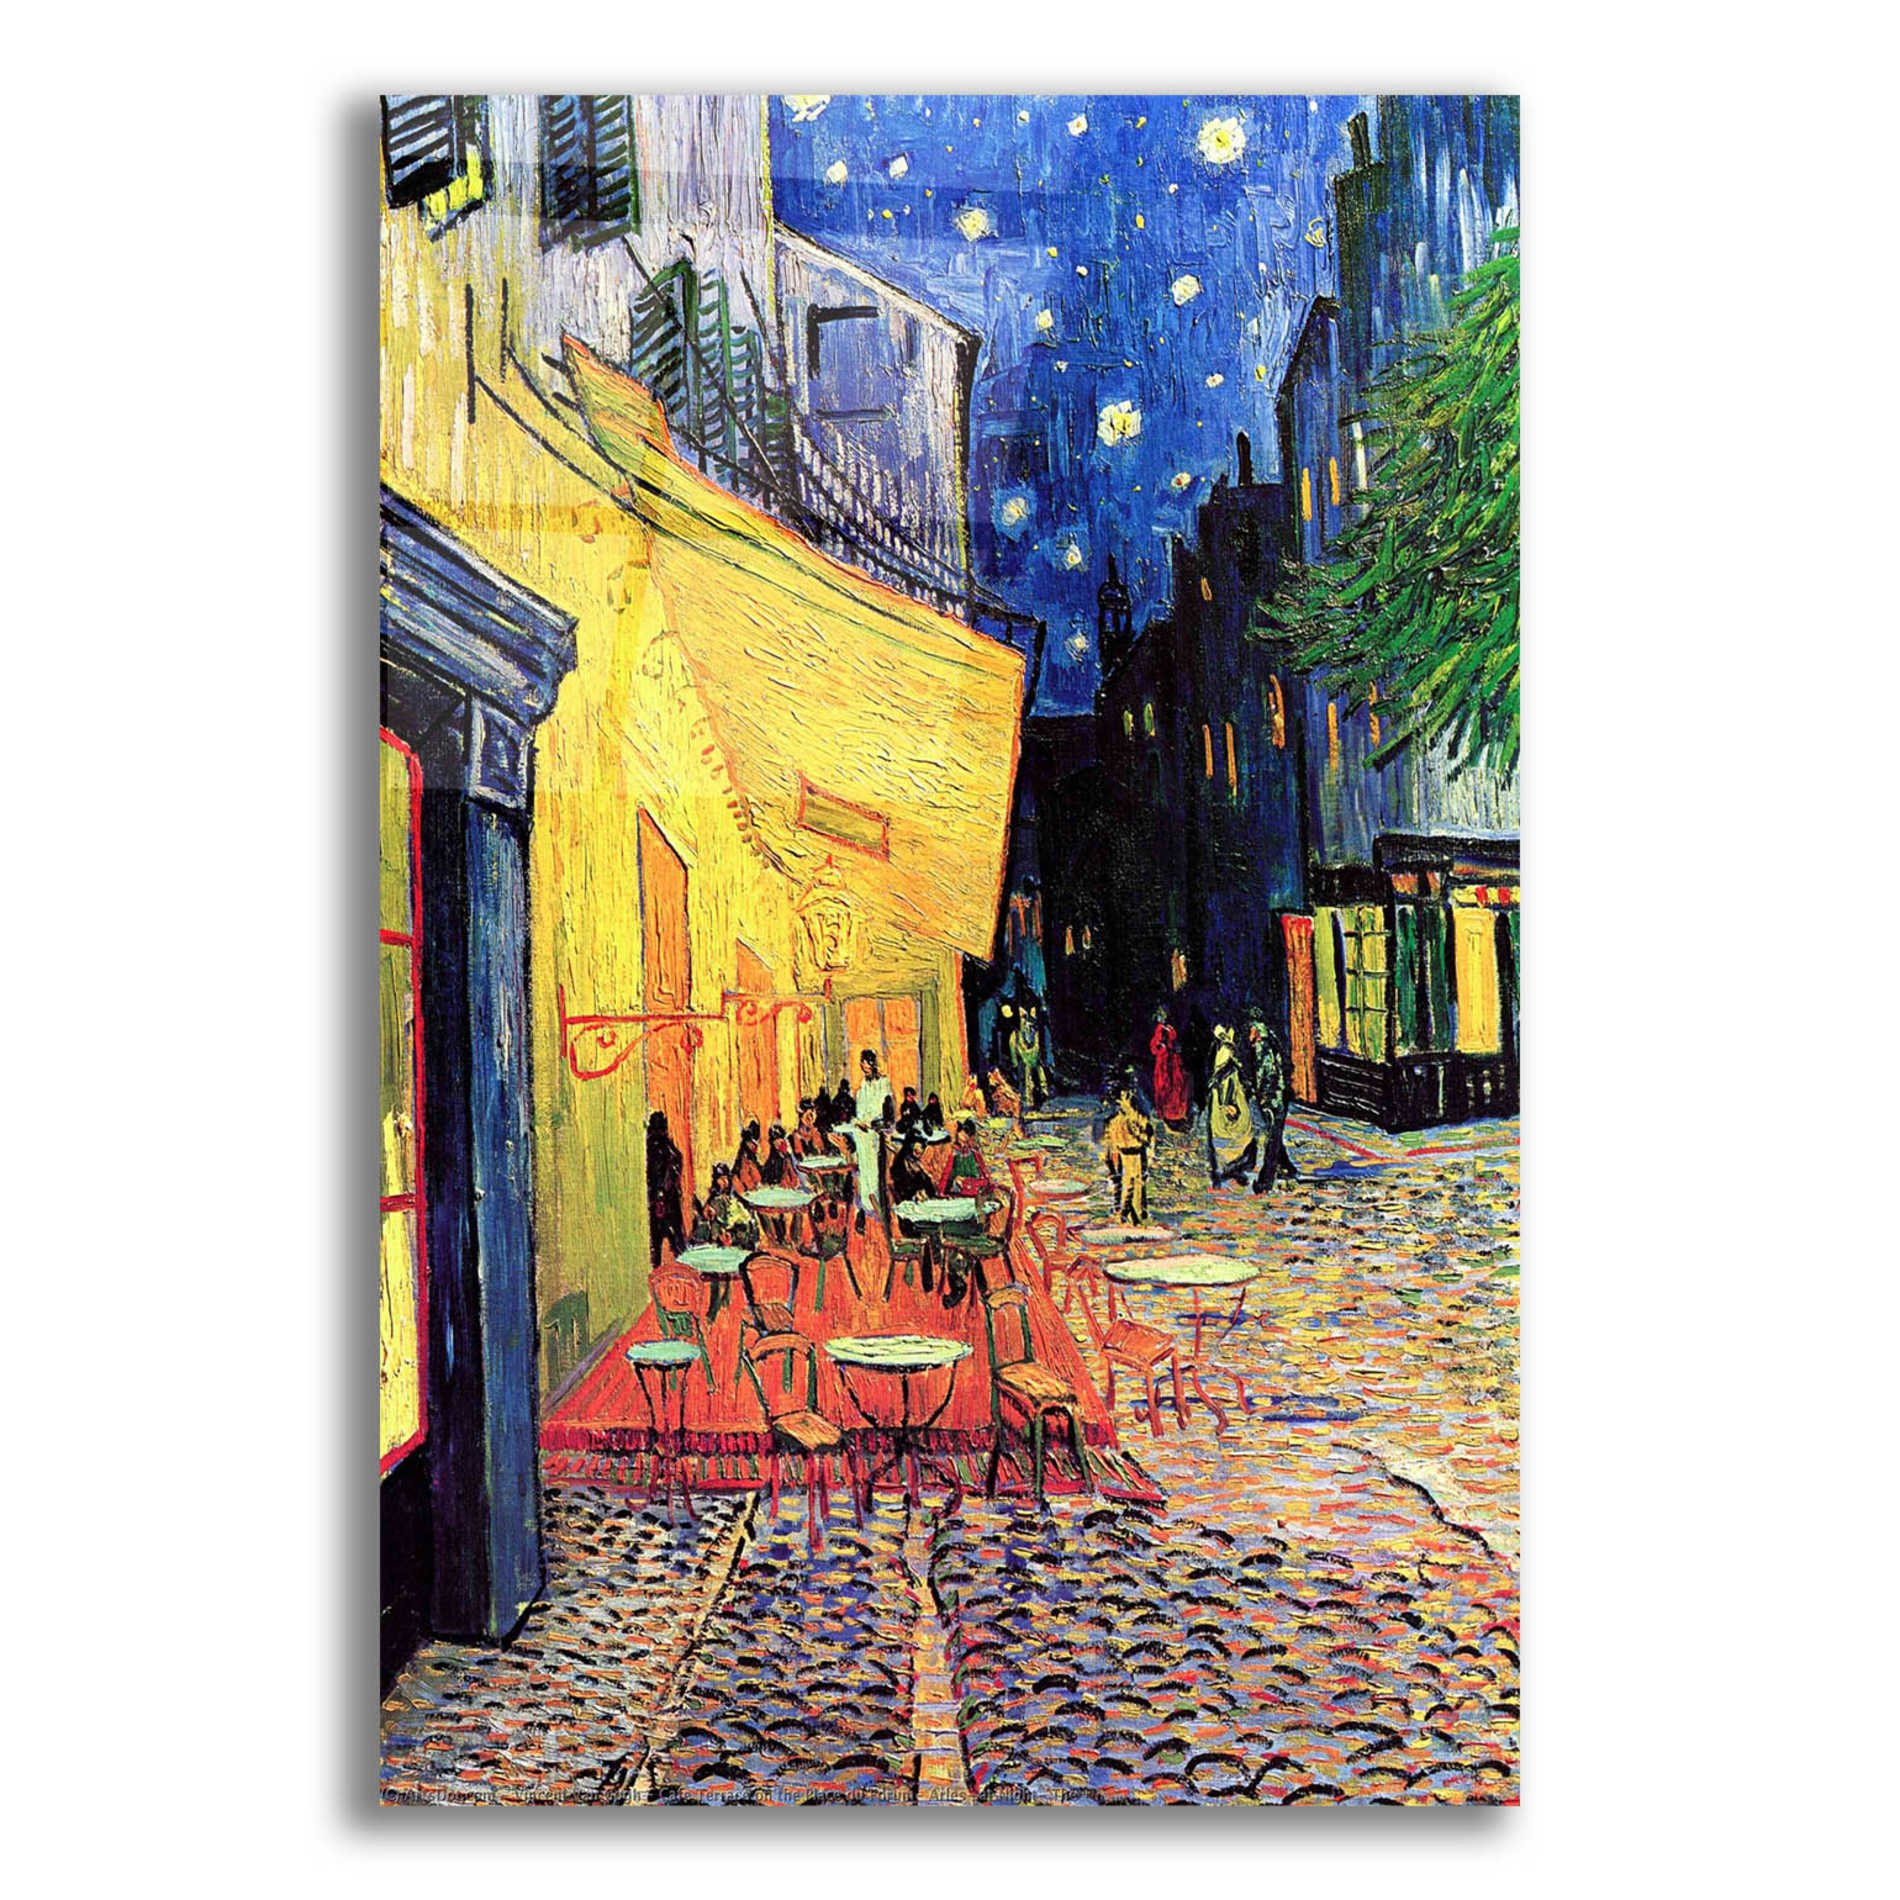 Epic Art 'Cafe Terrace at Night' by Vincent van Gogh, Acrylic Glass Wall Art,16x24